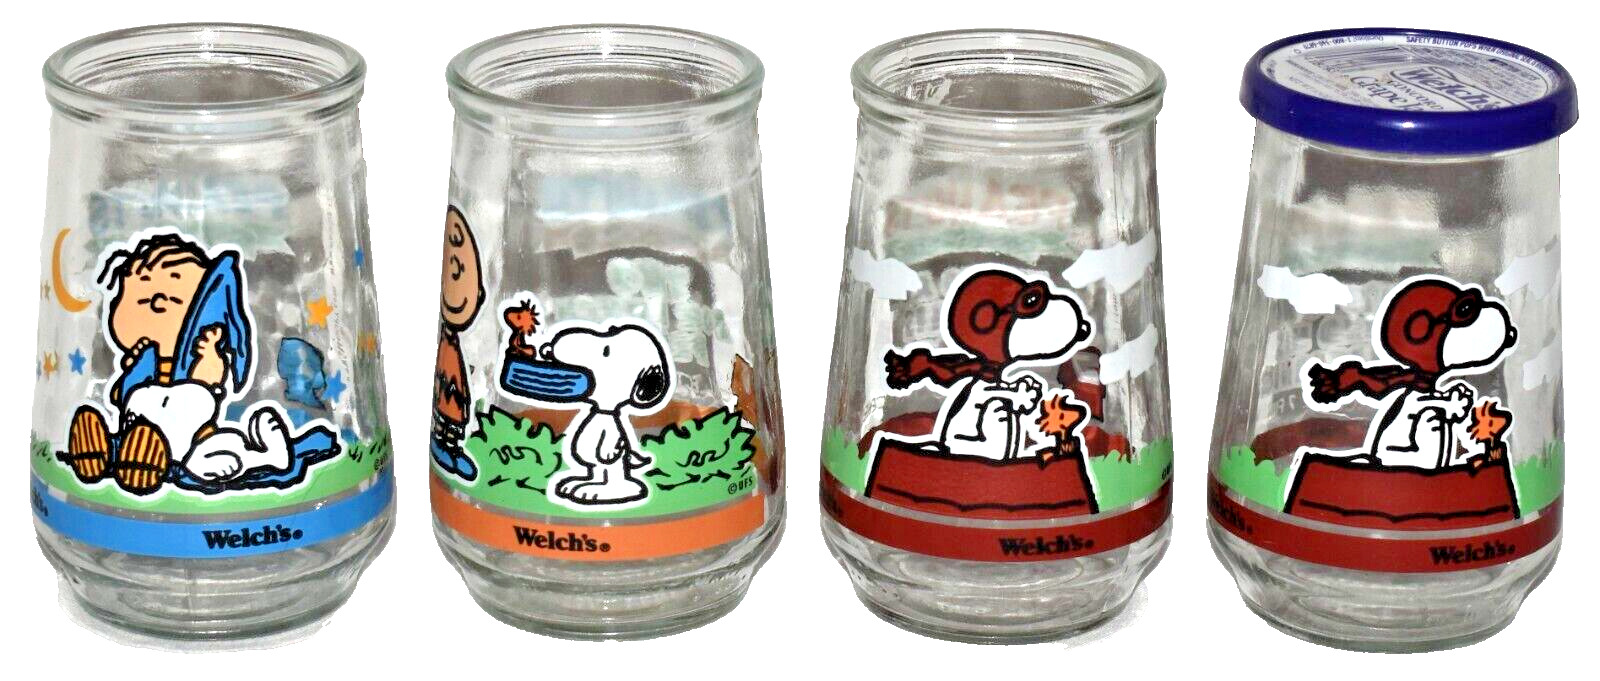 Vintage Welch\'s Peanuts Gang Snoopy Promo Jelly Jars Glasses Lot Of 4 #2 #6 #7